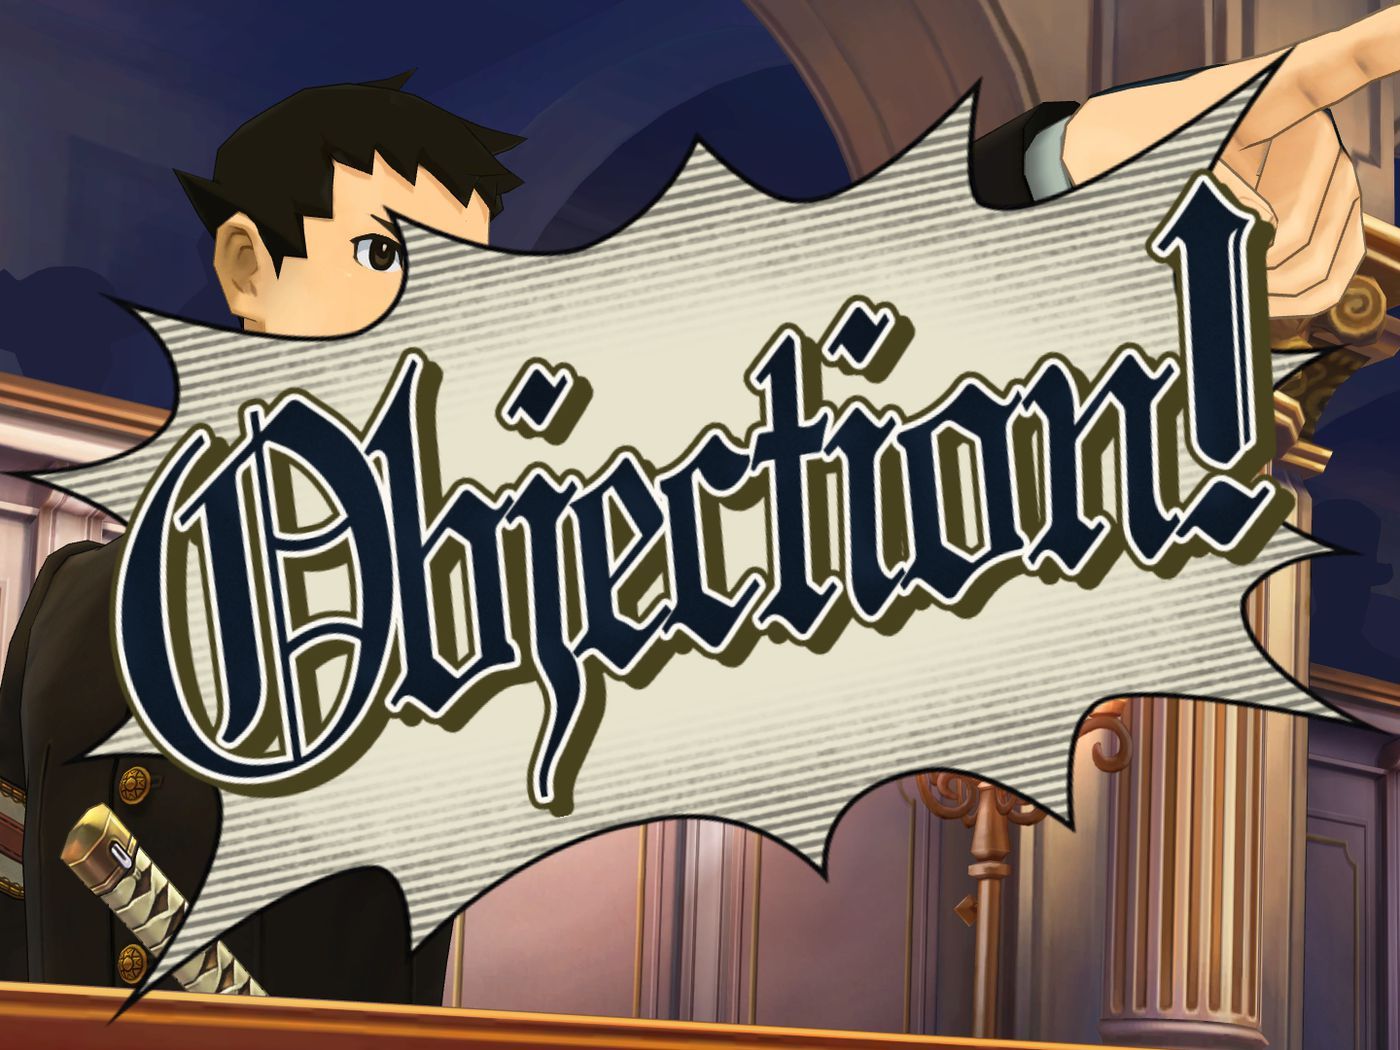 The Great Ace Attorney Chronicles looks like the perfect starting point for newcomers